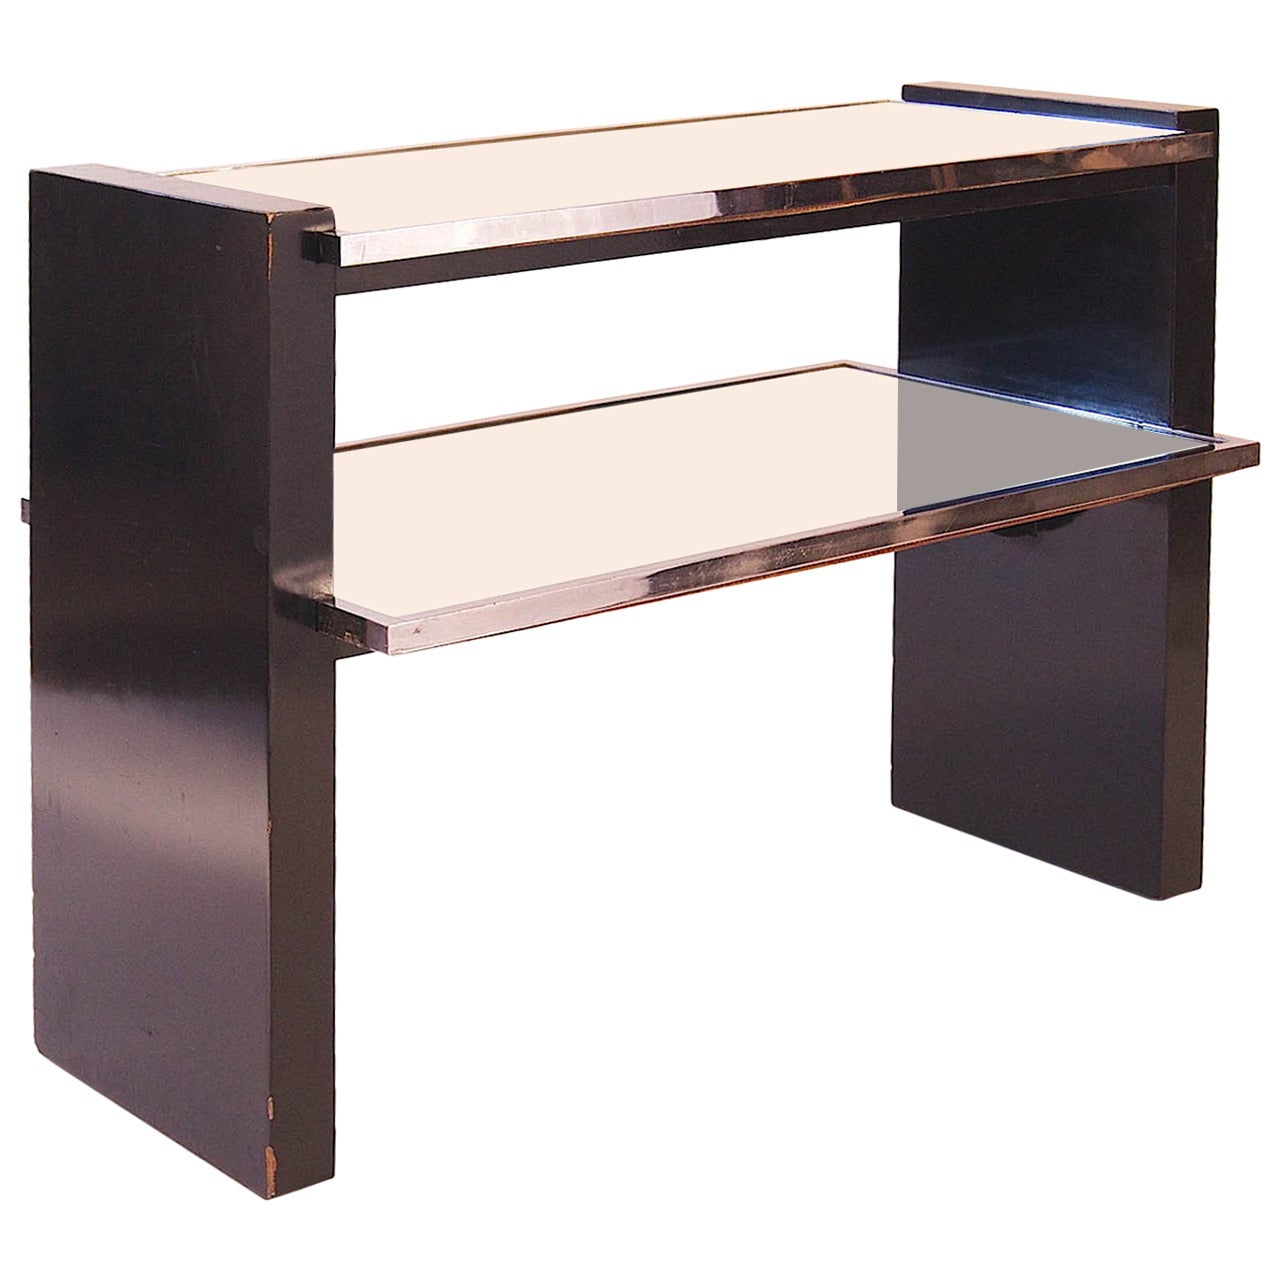 Black Lacquer, Steel and Mirrored Side Table by Jacques Adnet, France, 1950s For Sale